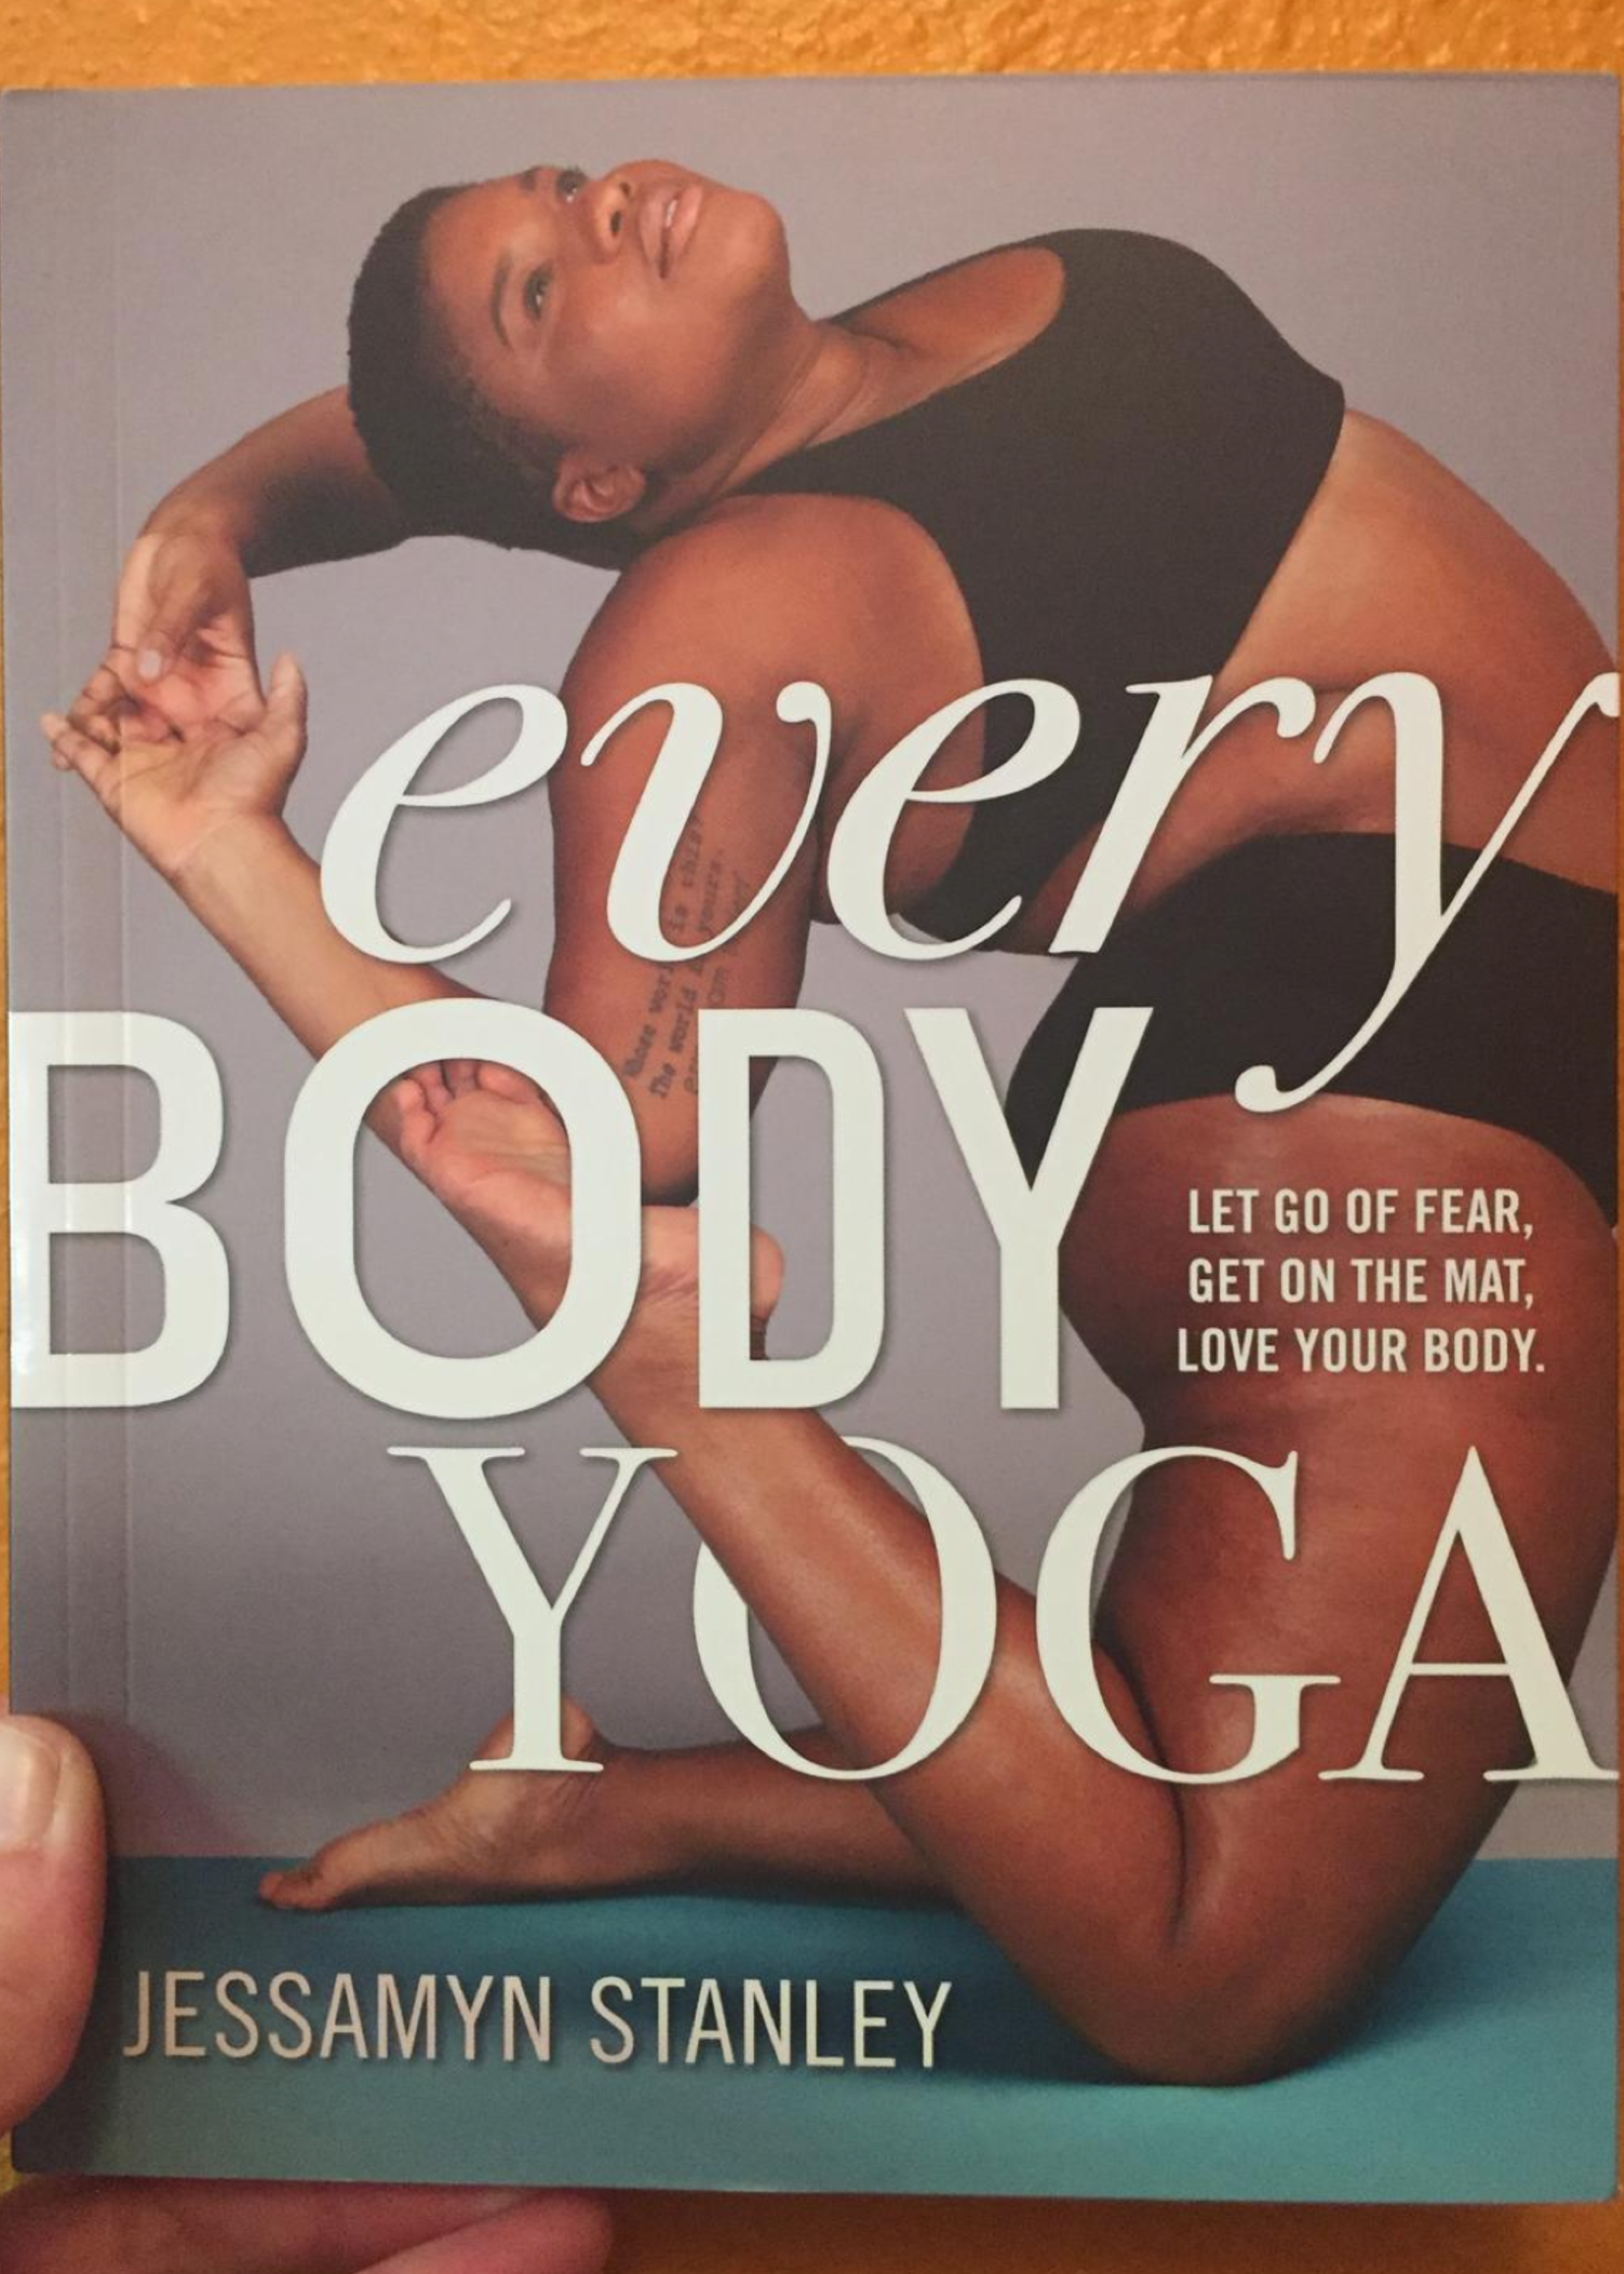 Every Body Yoga: Let Go of Fear, Get On the Mat